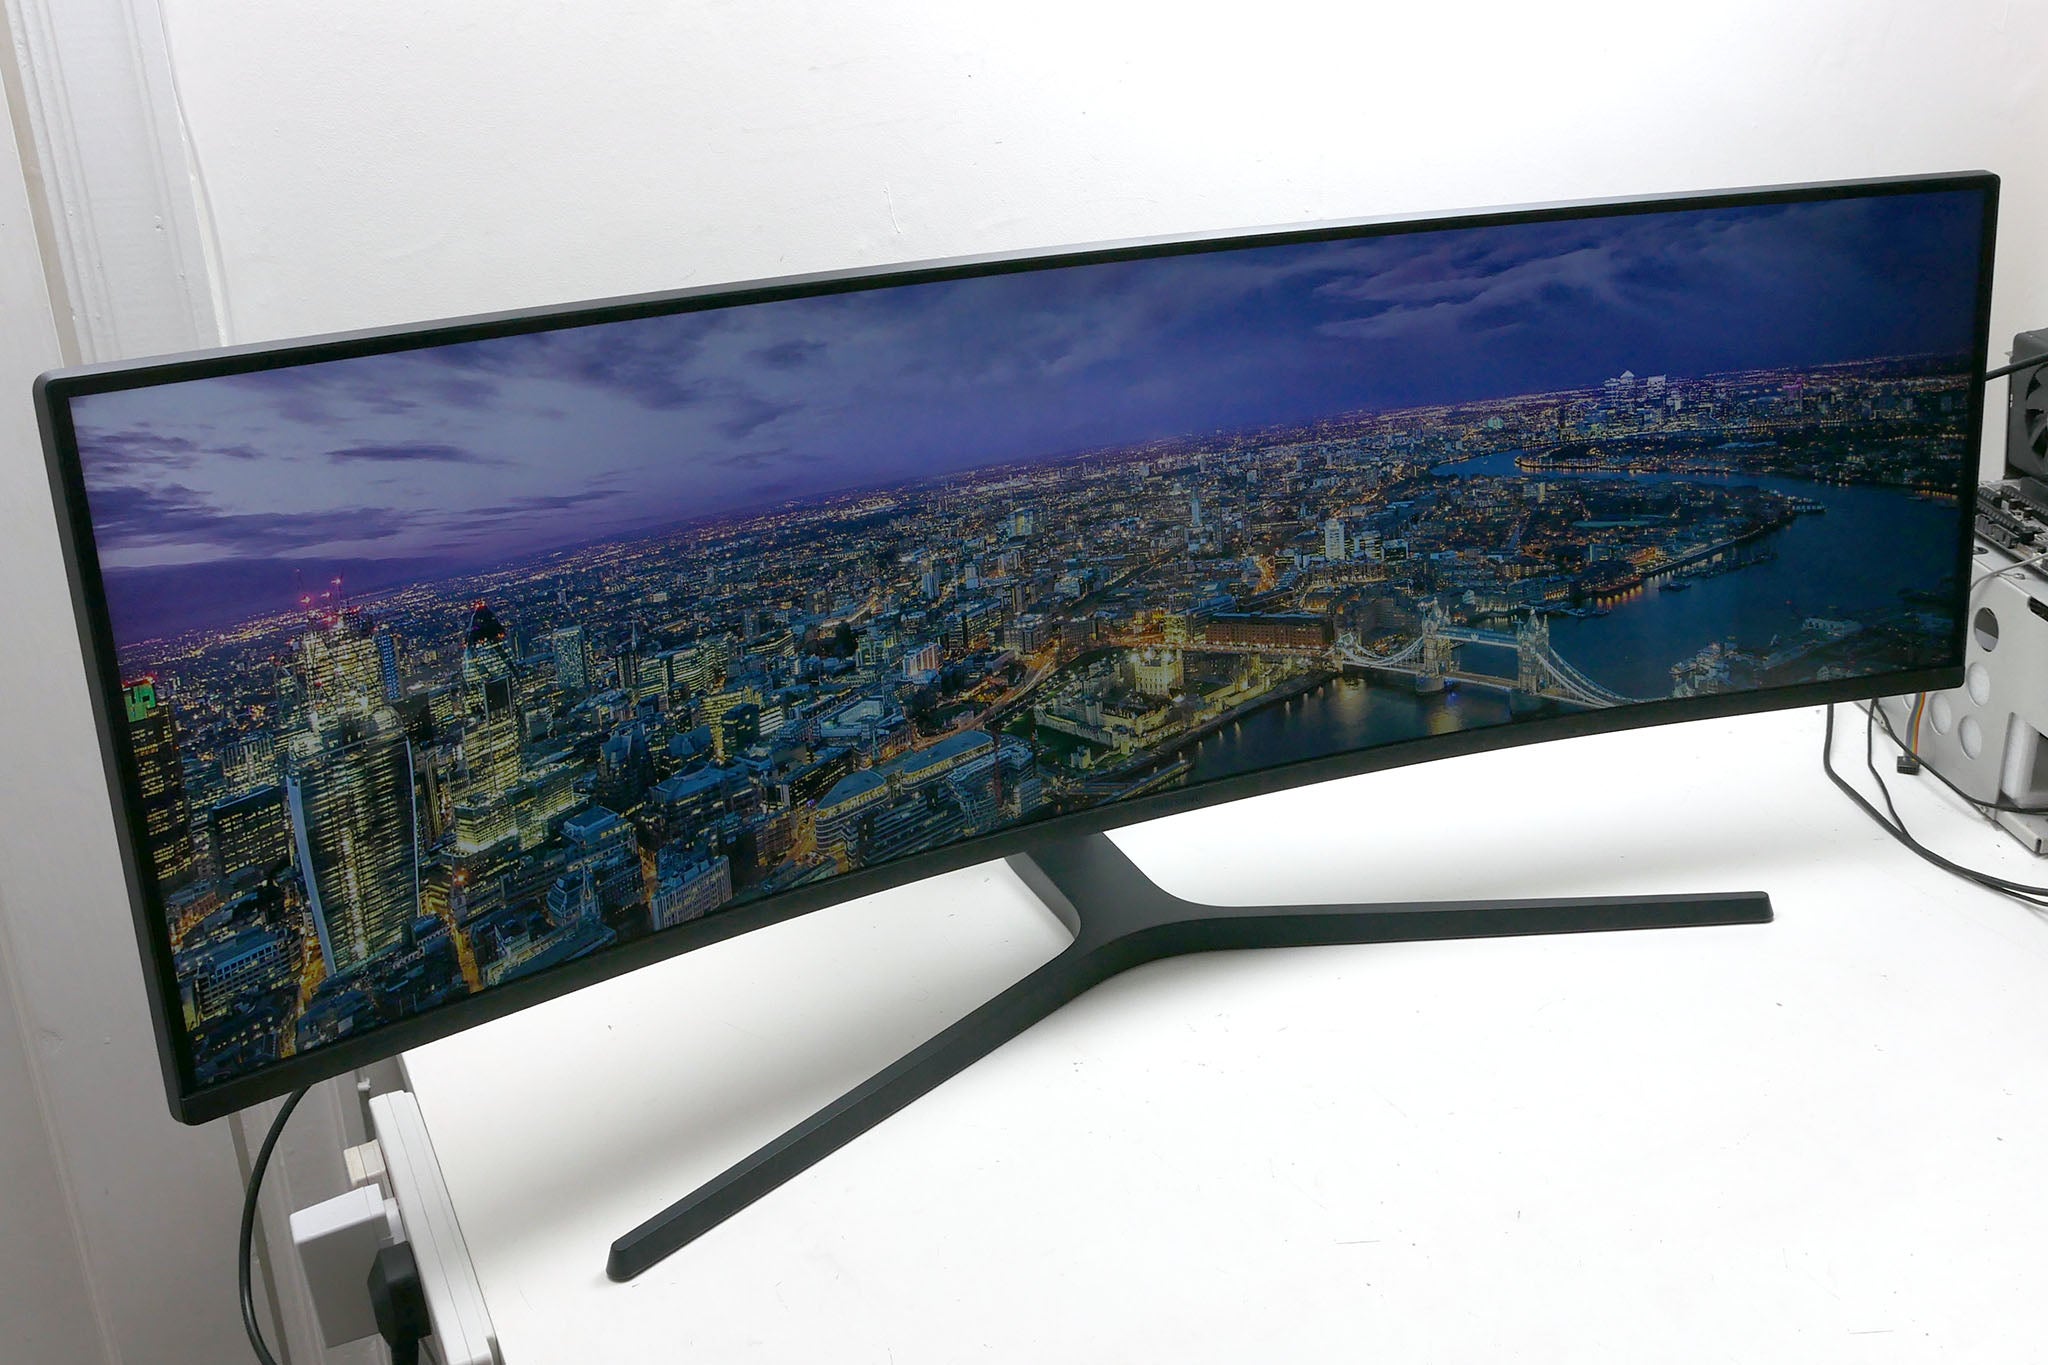 Samsung C49J89 ultra-wide monitor displaying cityscape wallpaper.